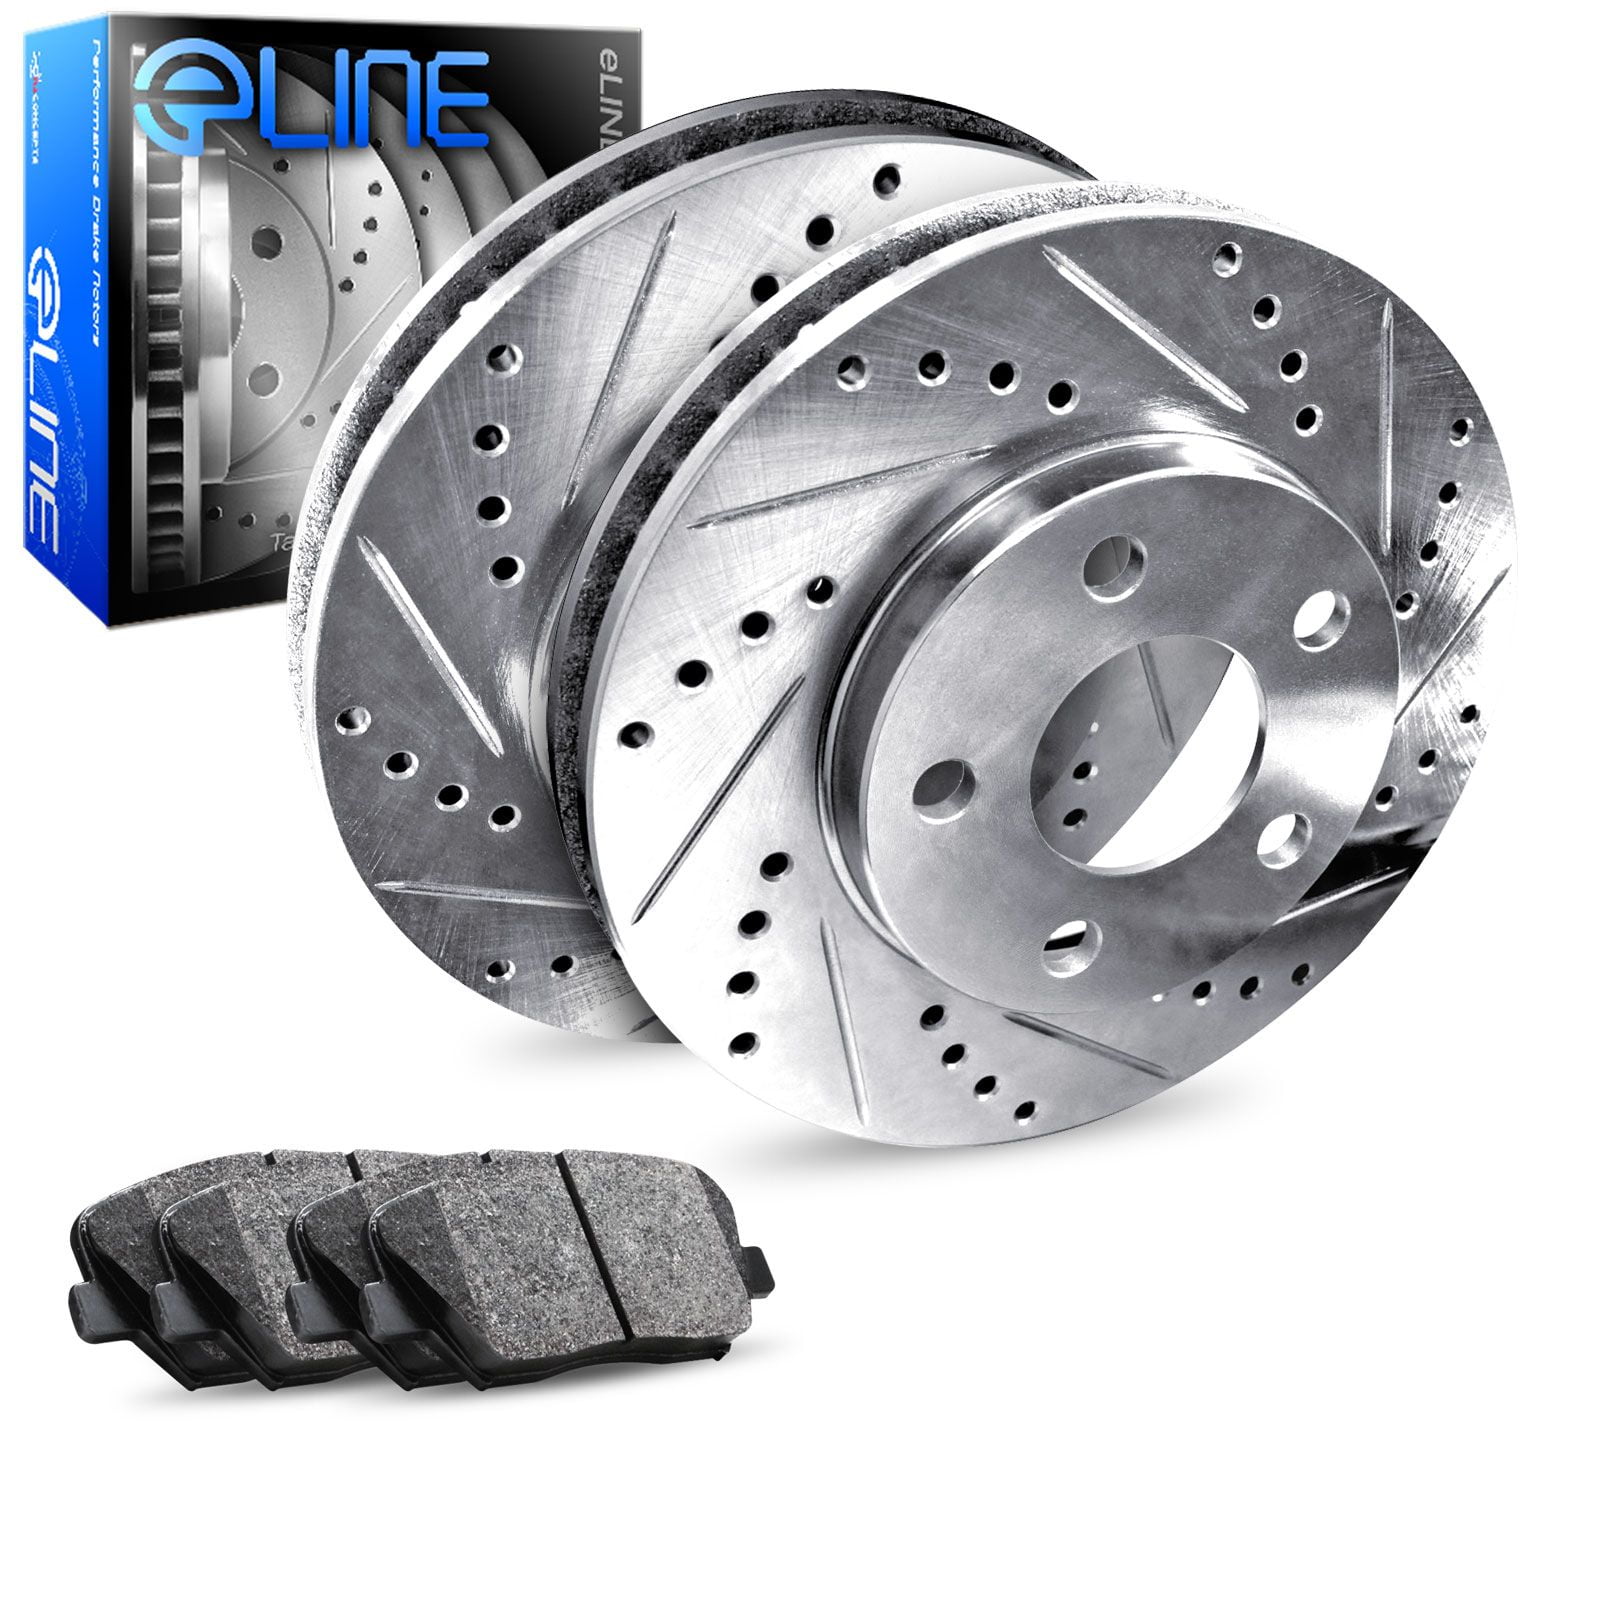 2 Front & 2 Rear Slotted Disc Brake Rotors for 2004-2012 Mazda 3 